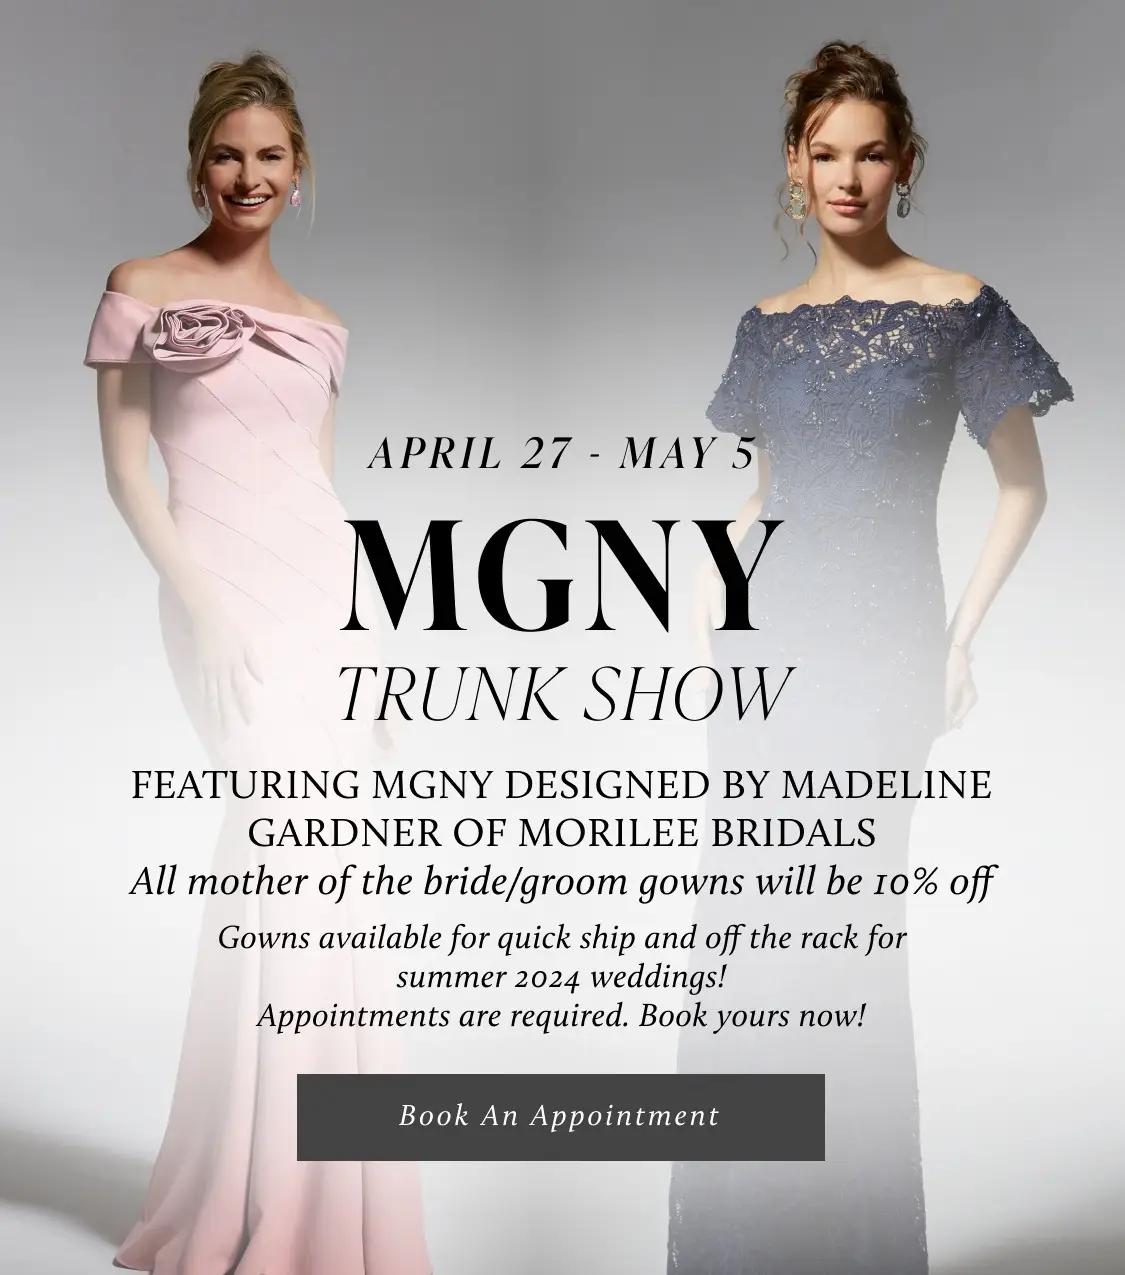 MGNY Trunk Show mobile